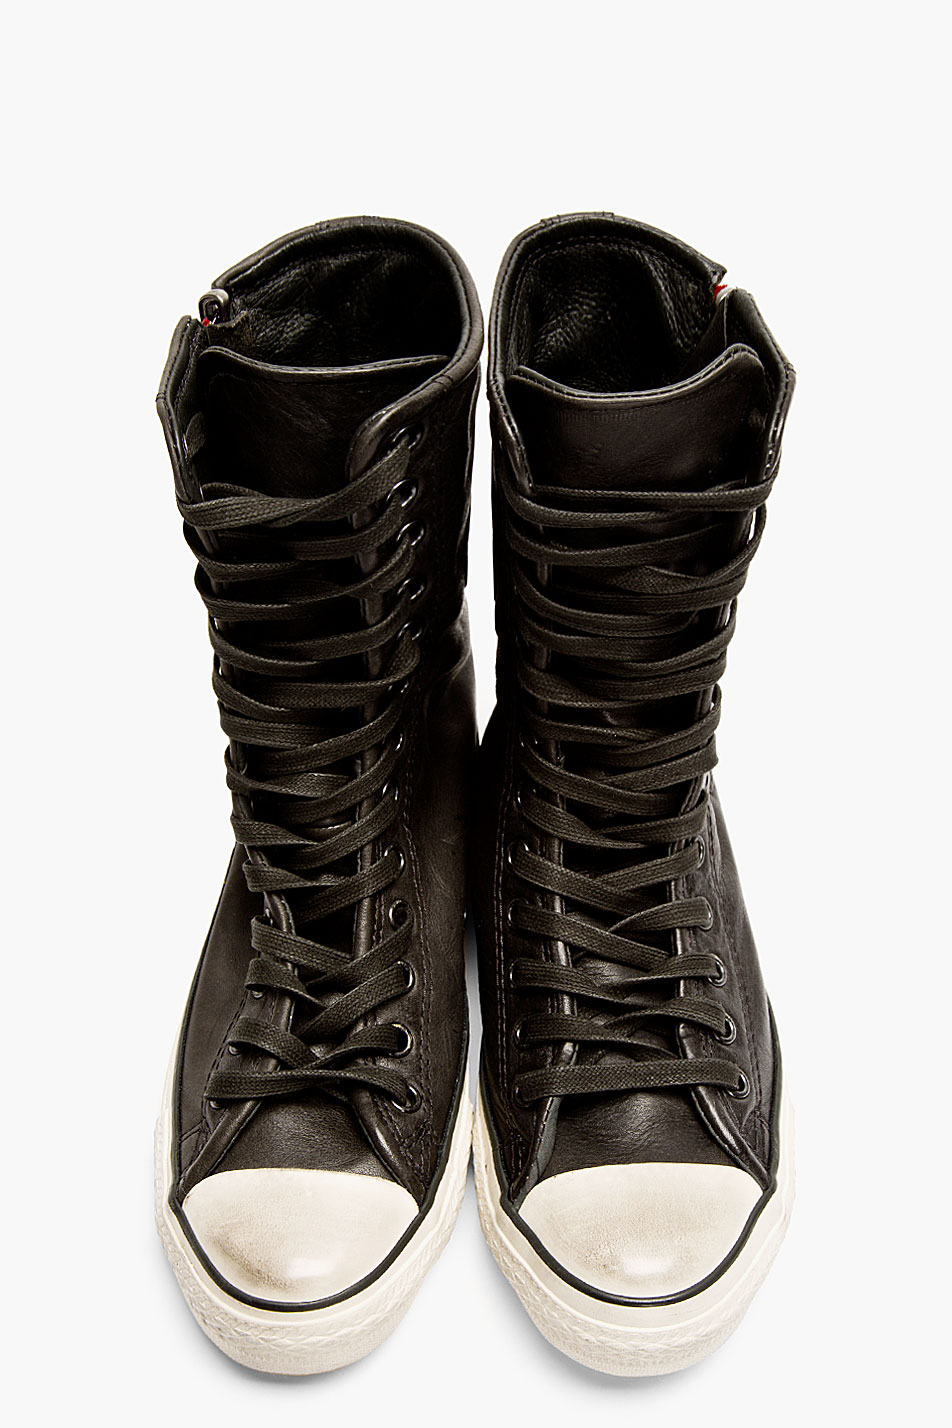 Converse Black Leather Tall Zip Sneakers for Men | Lyst